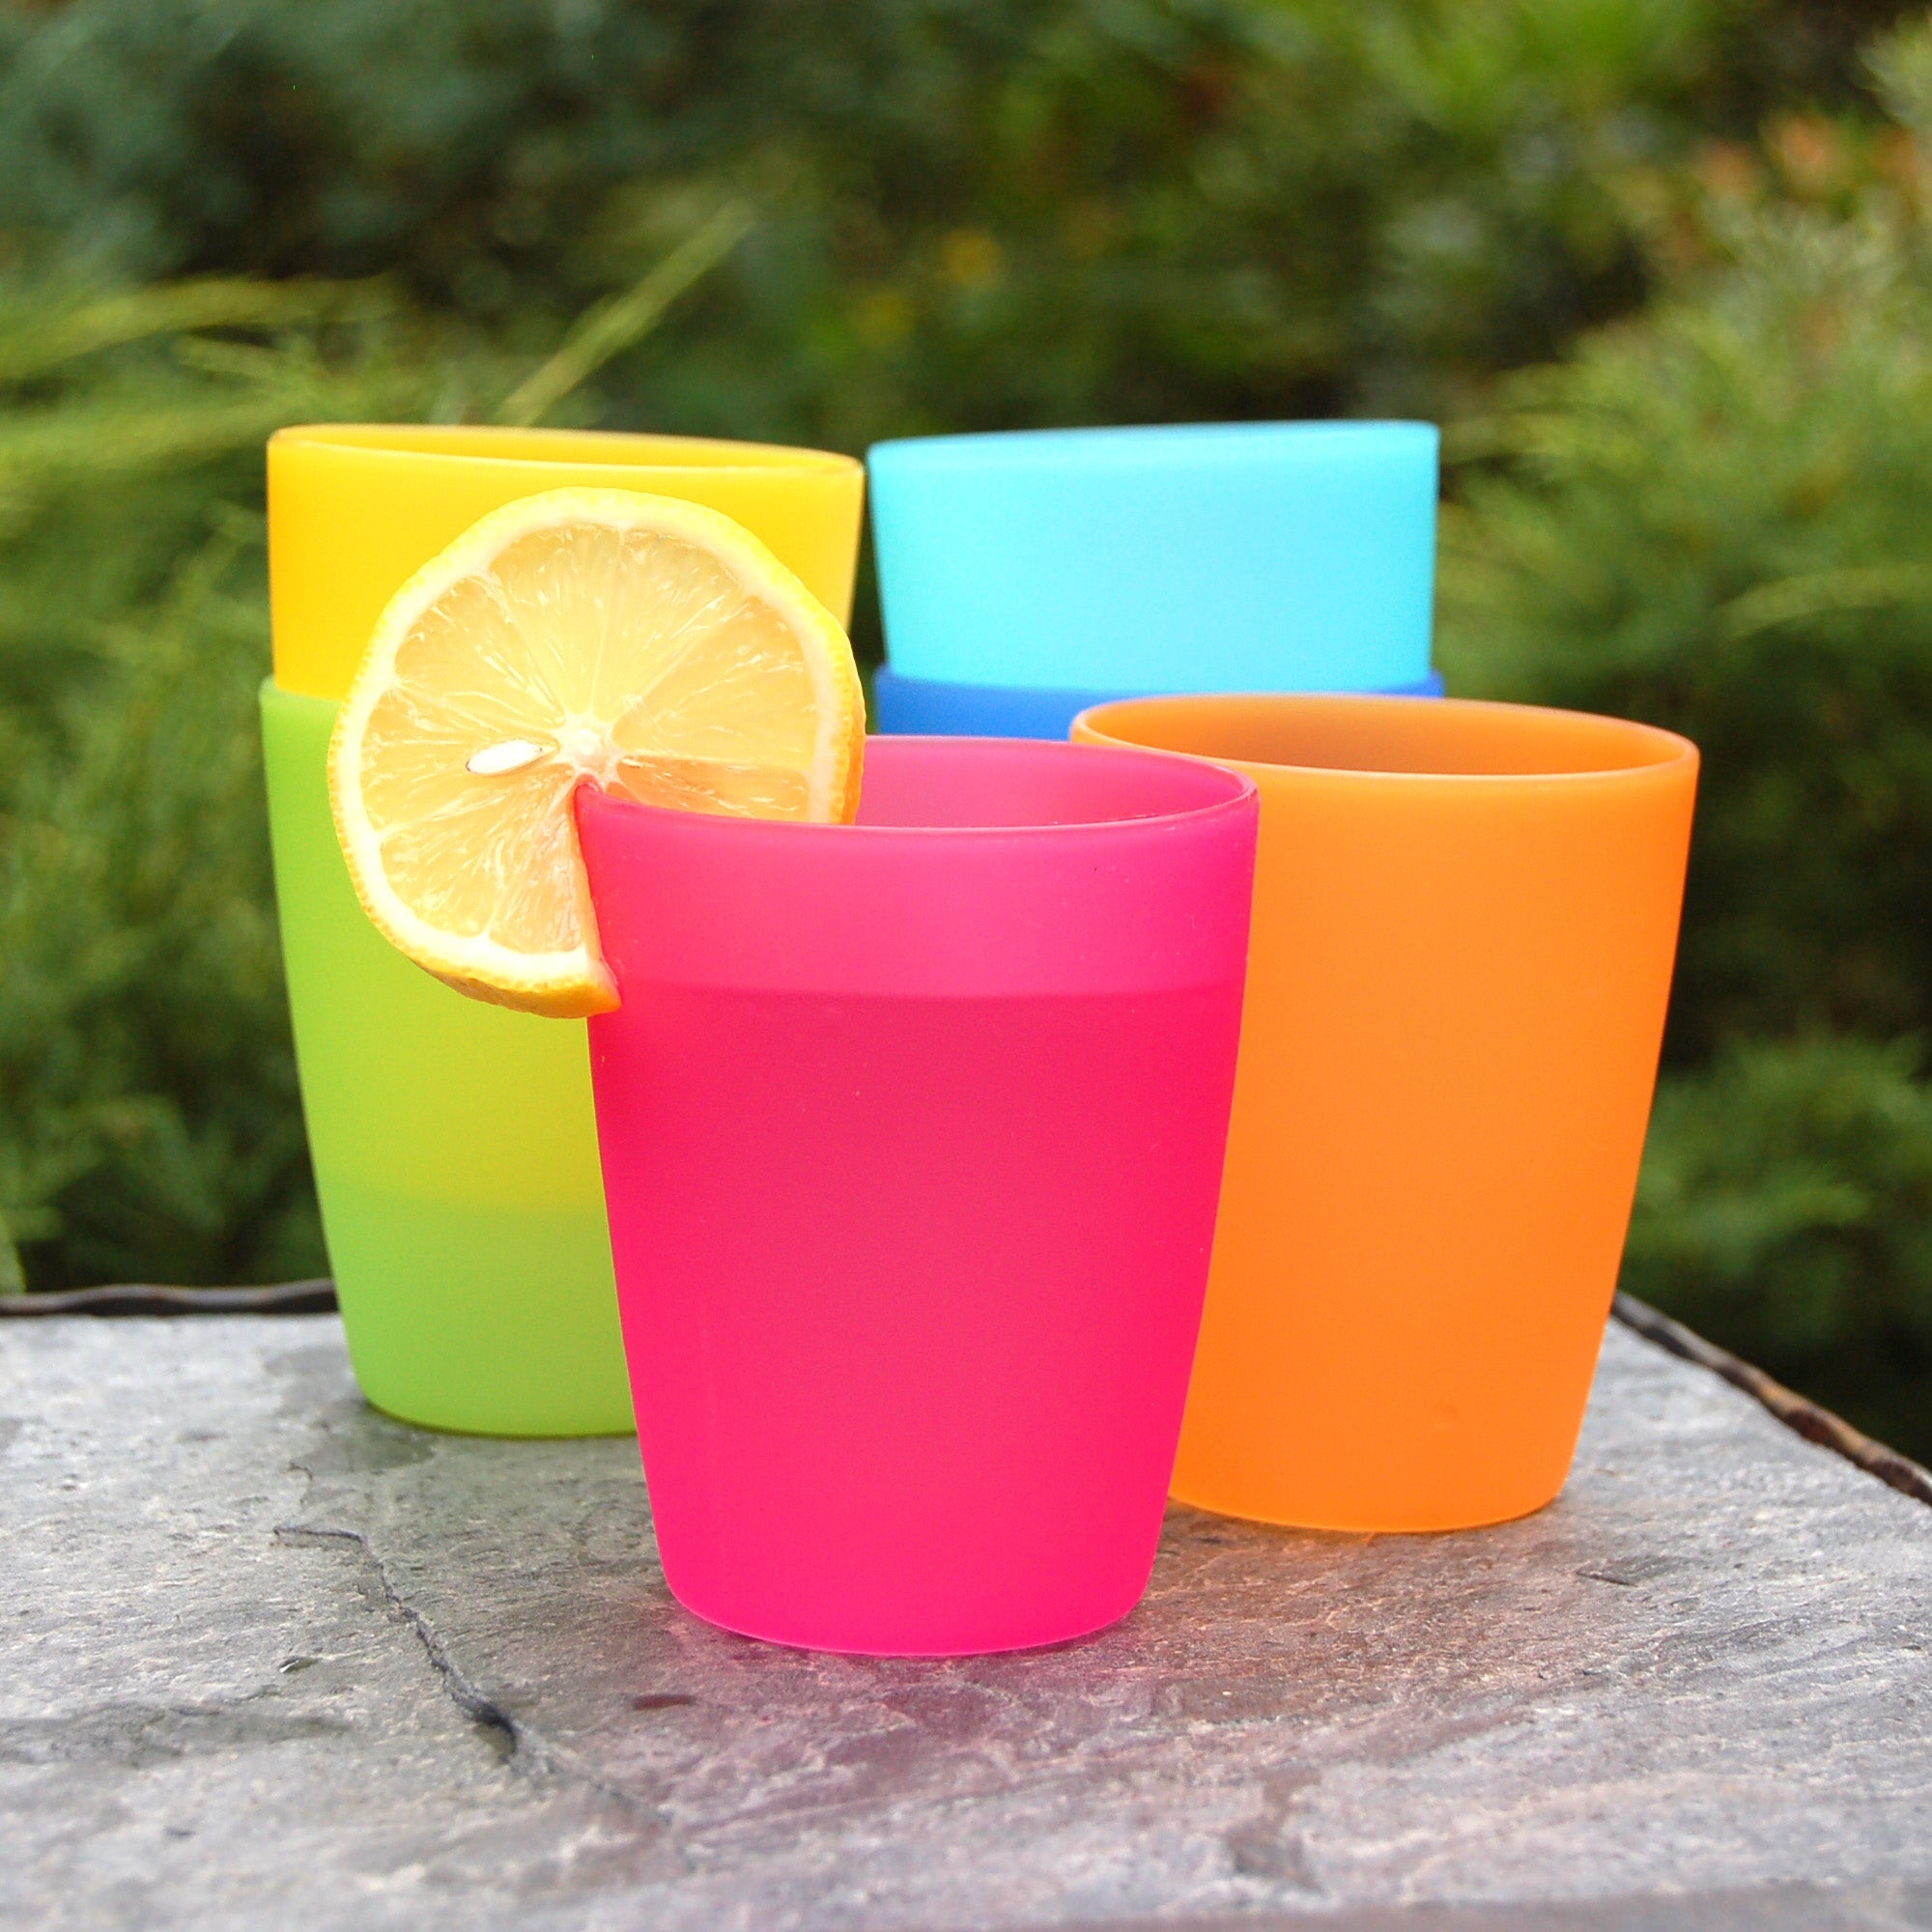 Reusable Plastic Cup Collections 12, 18, 24 or 36 Cups - Choice of 6 Colors